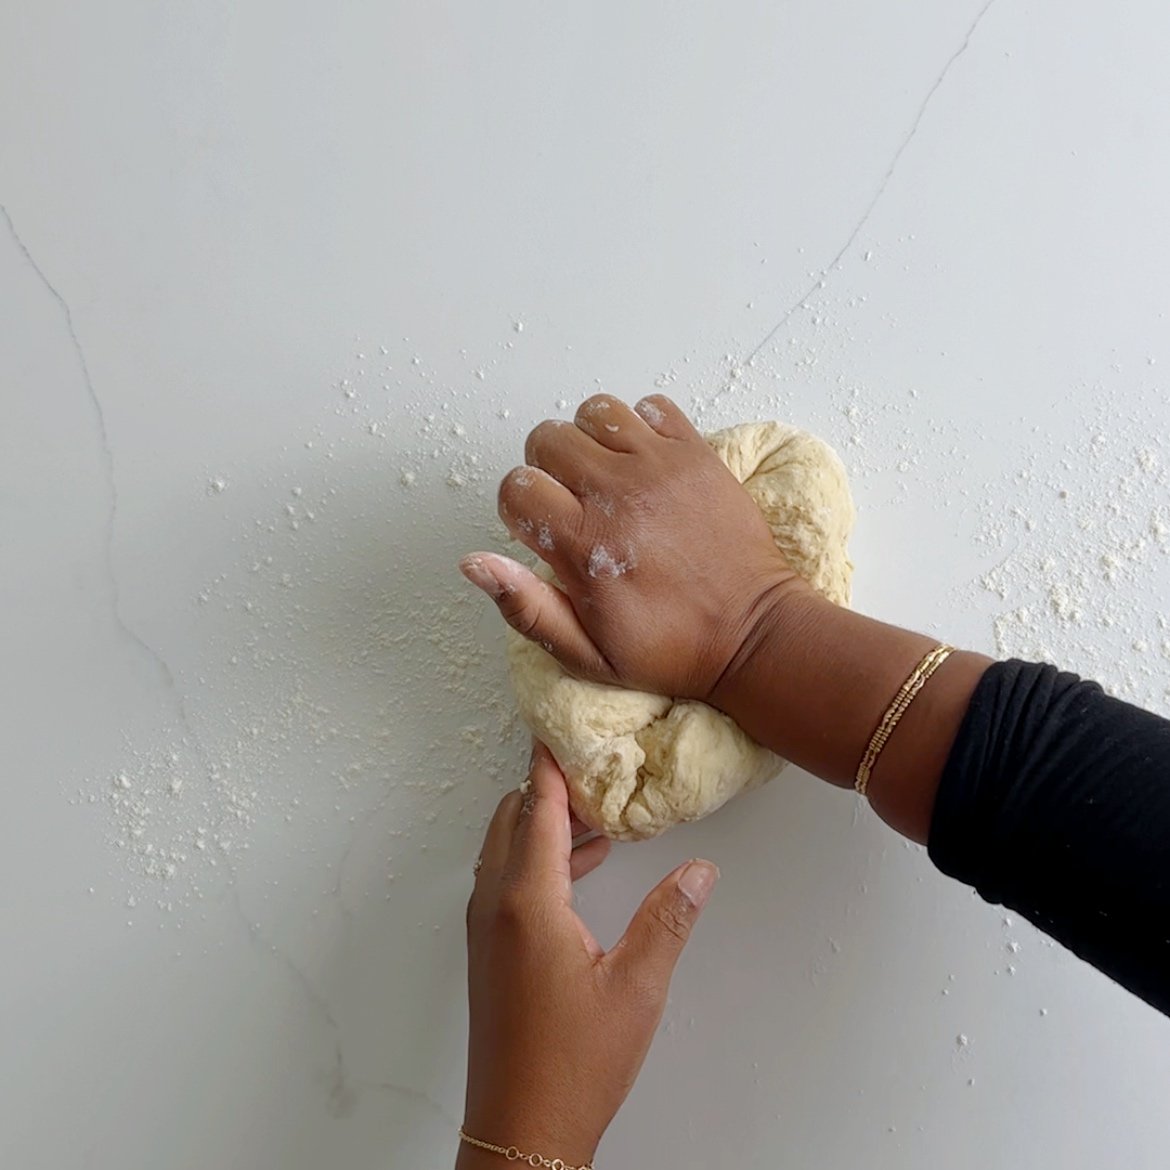 using hands to knead dough